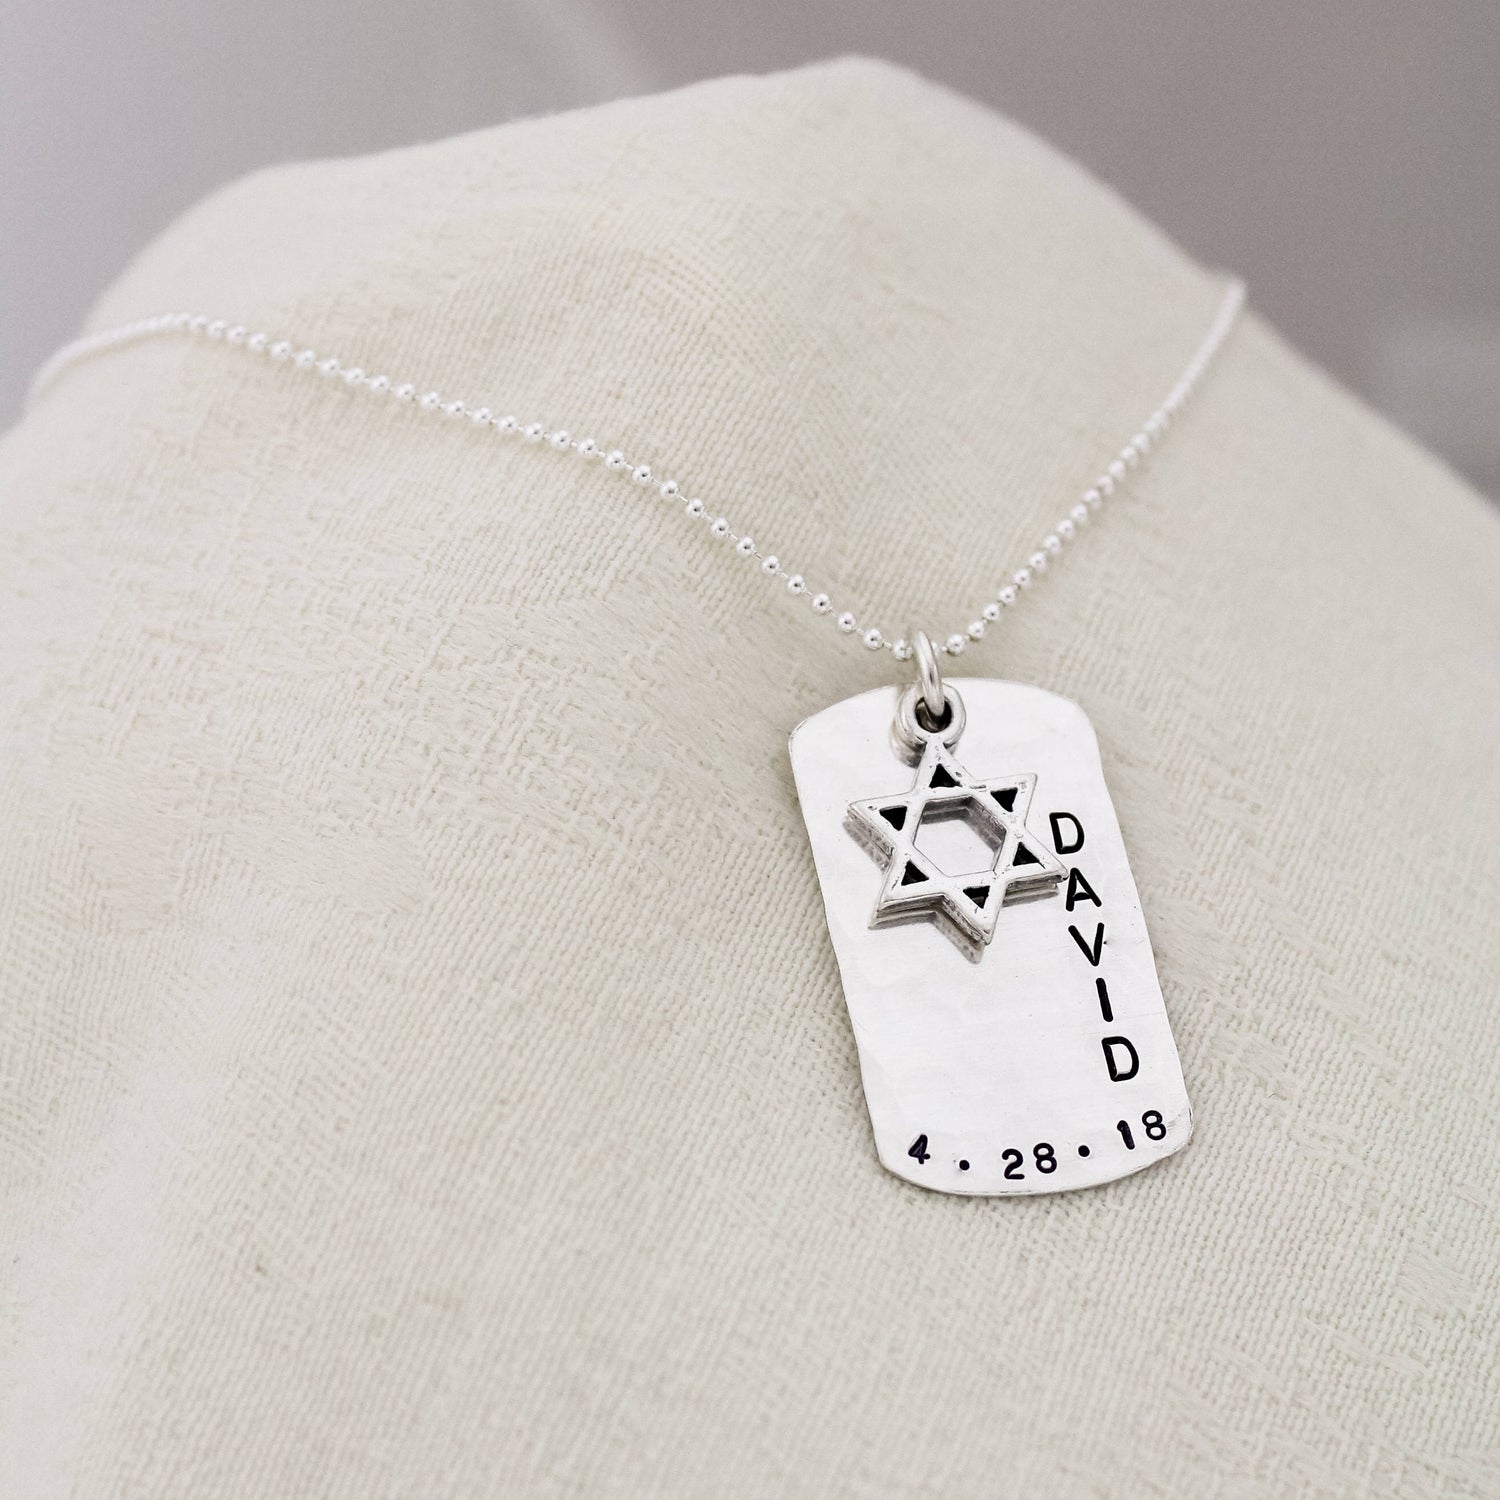 Personalized Boys Bar Mitzvah Necklace Sterling Silver, Personalized Star of David Necklace, Custom Bar Mitzvah Dog Tag Charm, Hand Stamped